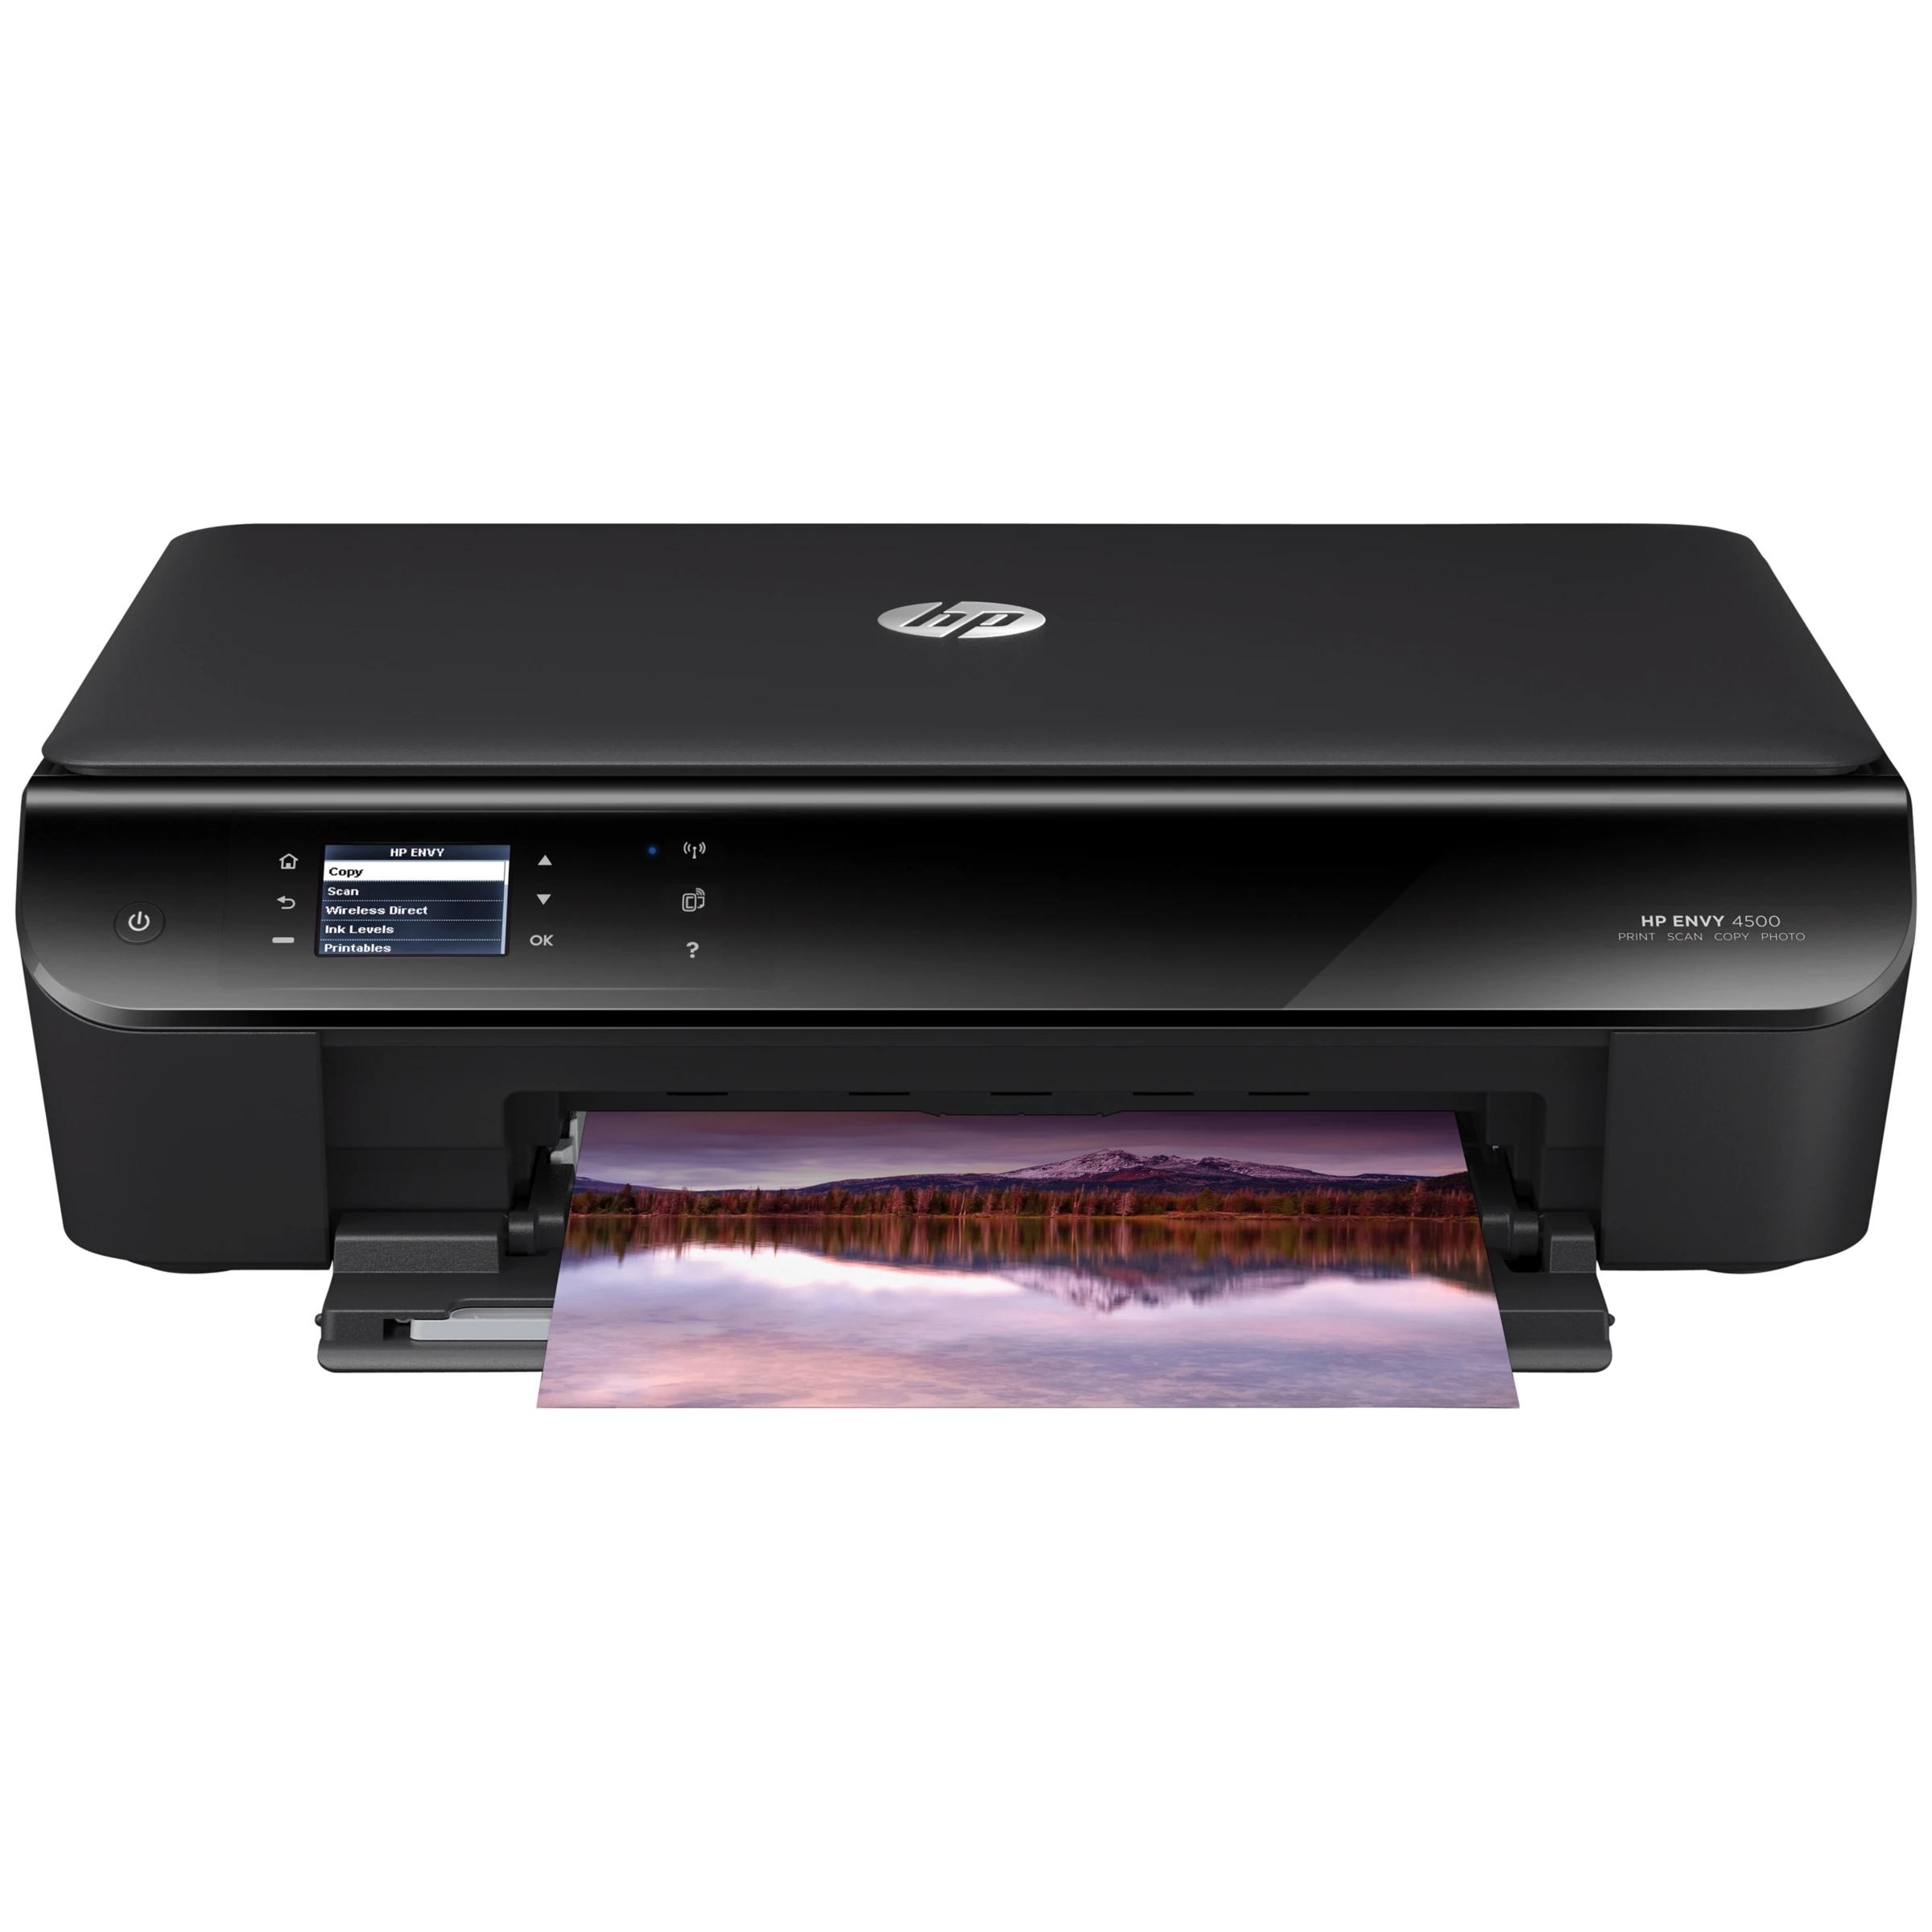 Hp envy 4500 e-all-in-one printers and airprint compatibility